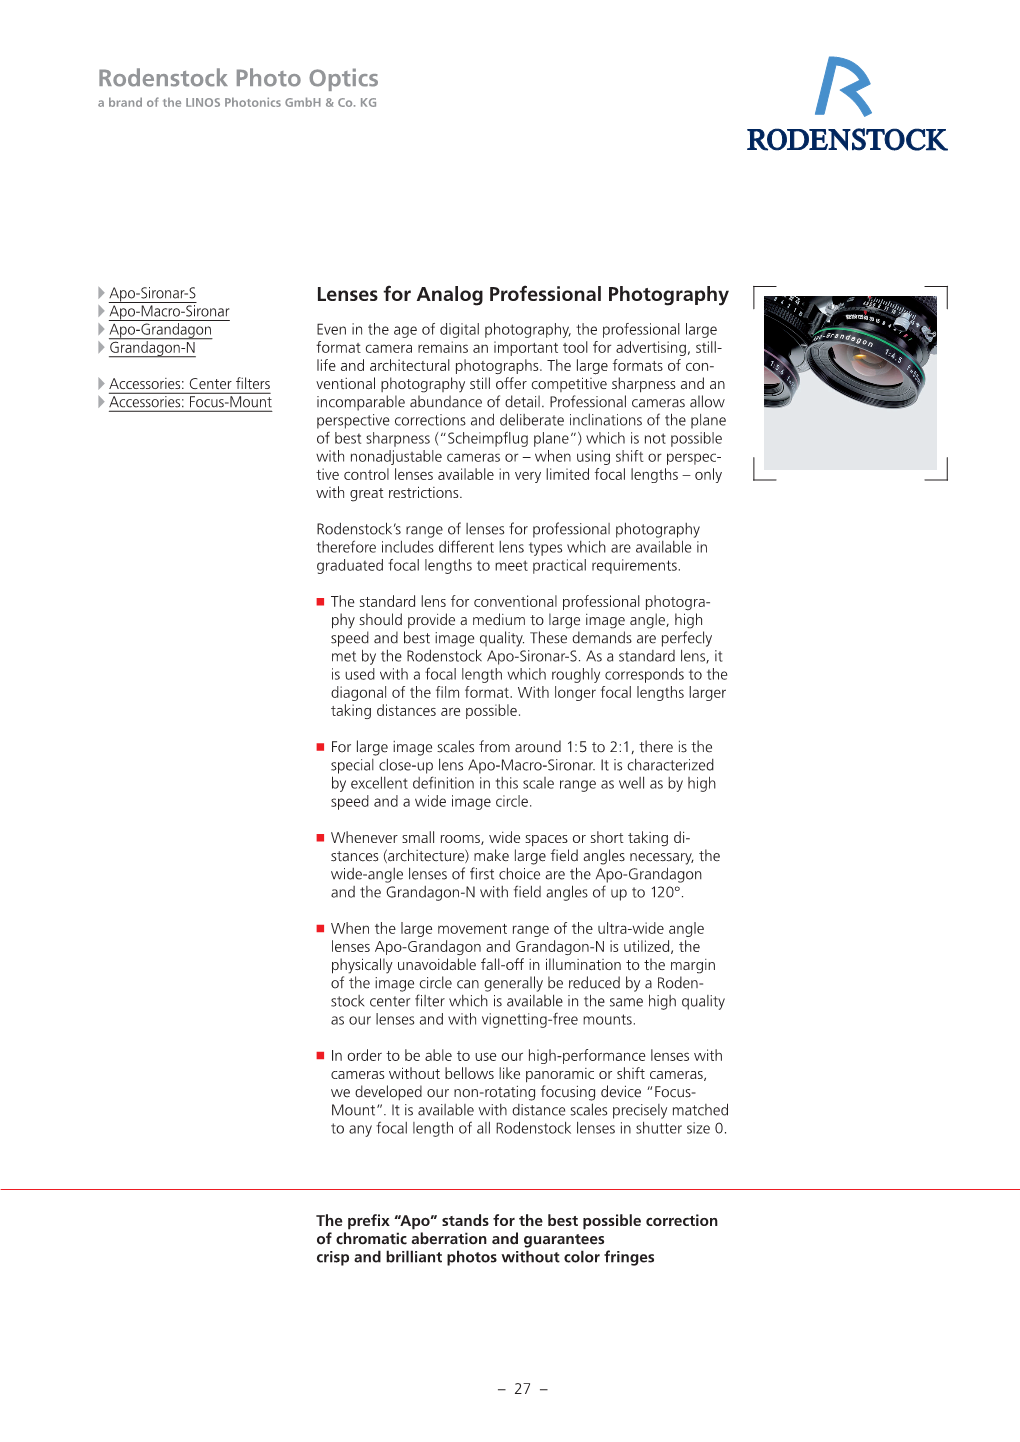 Lenses for Analog Professional Photography